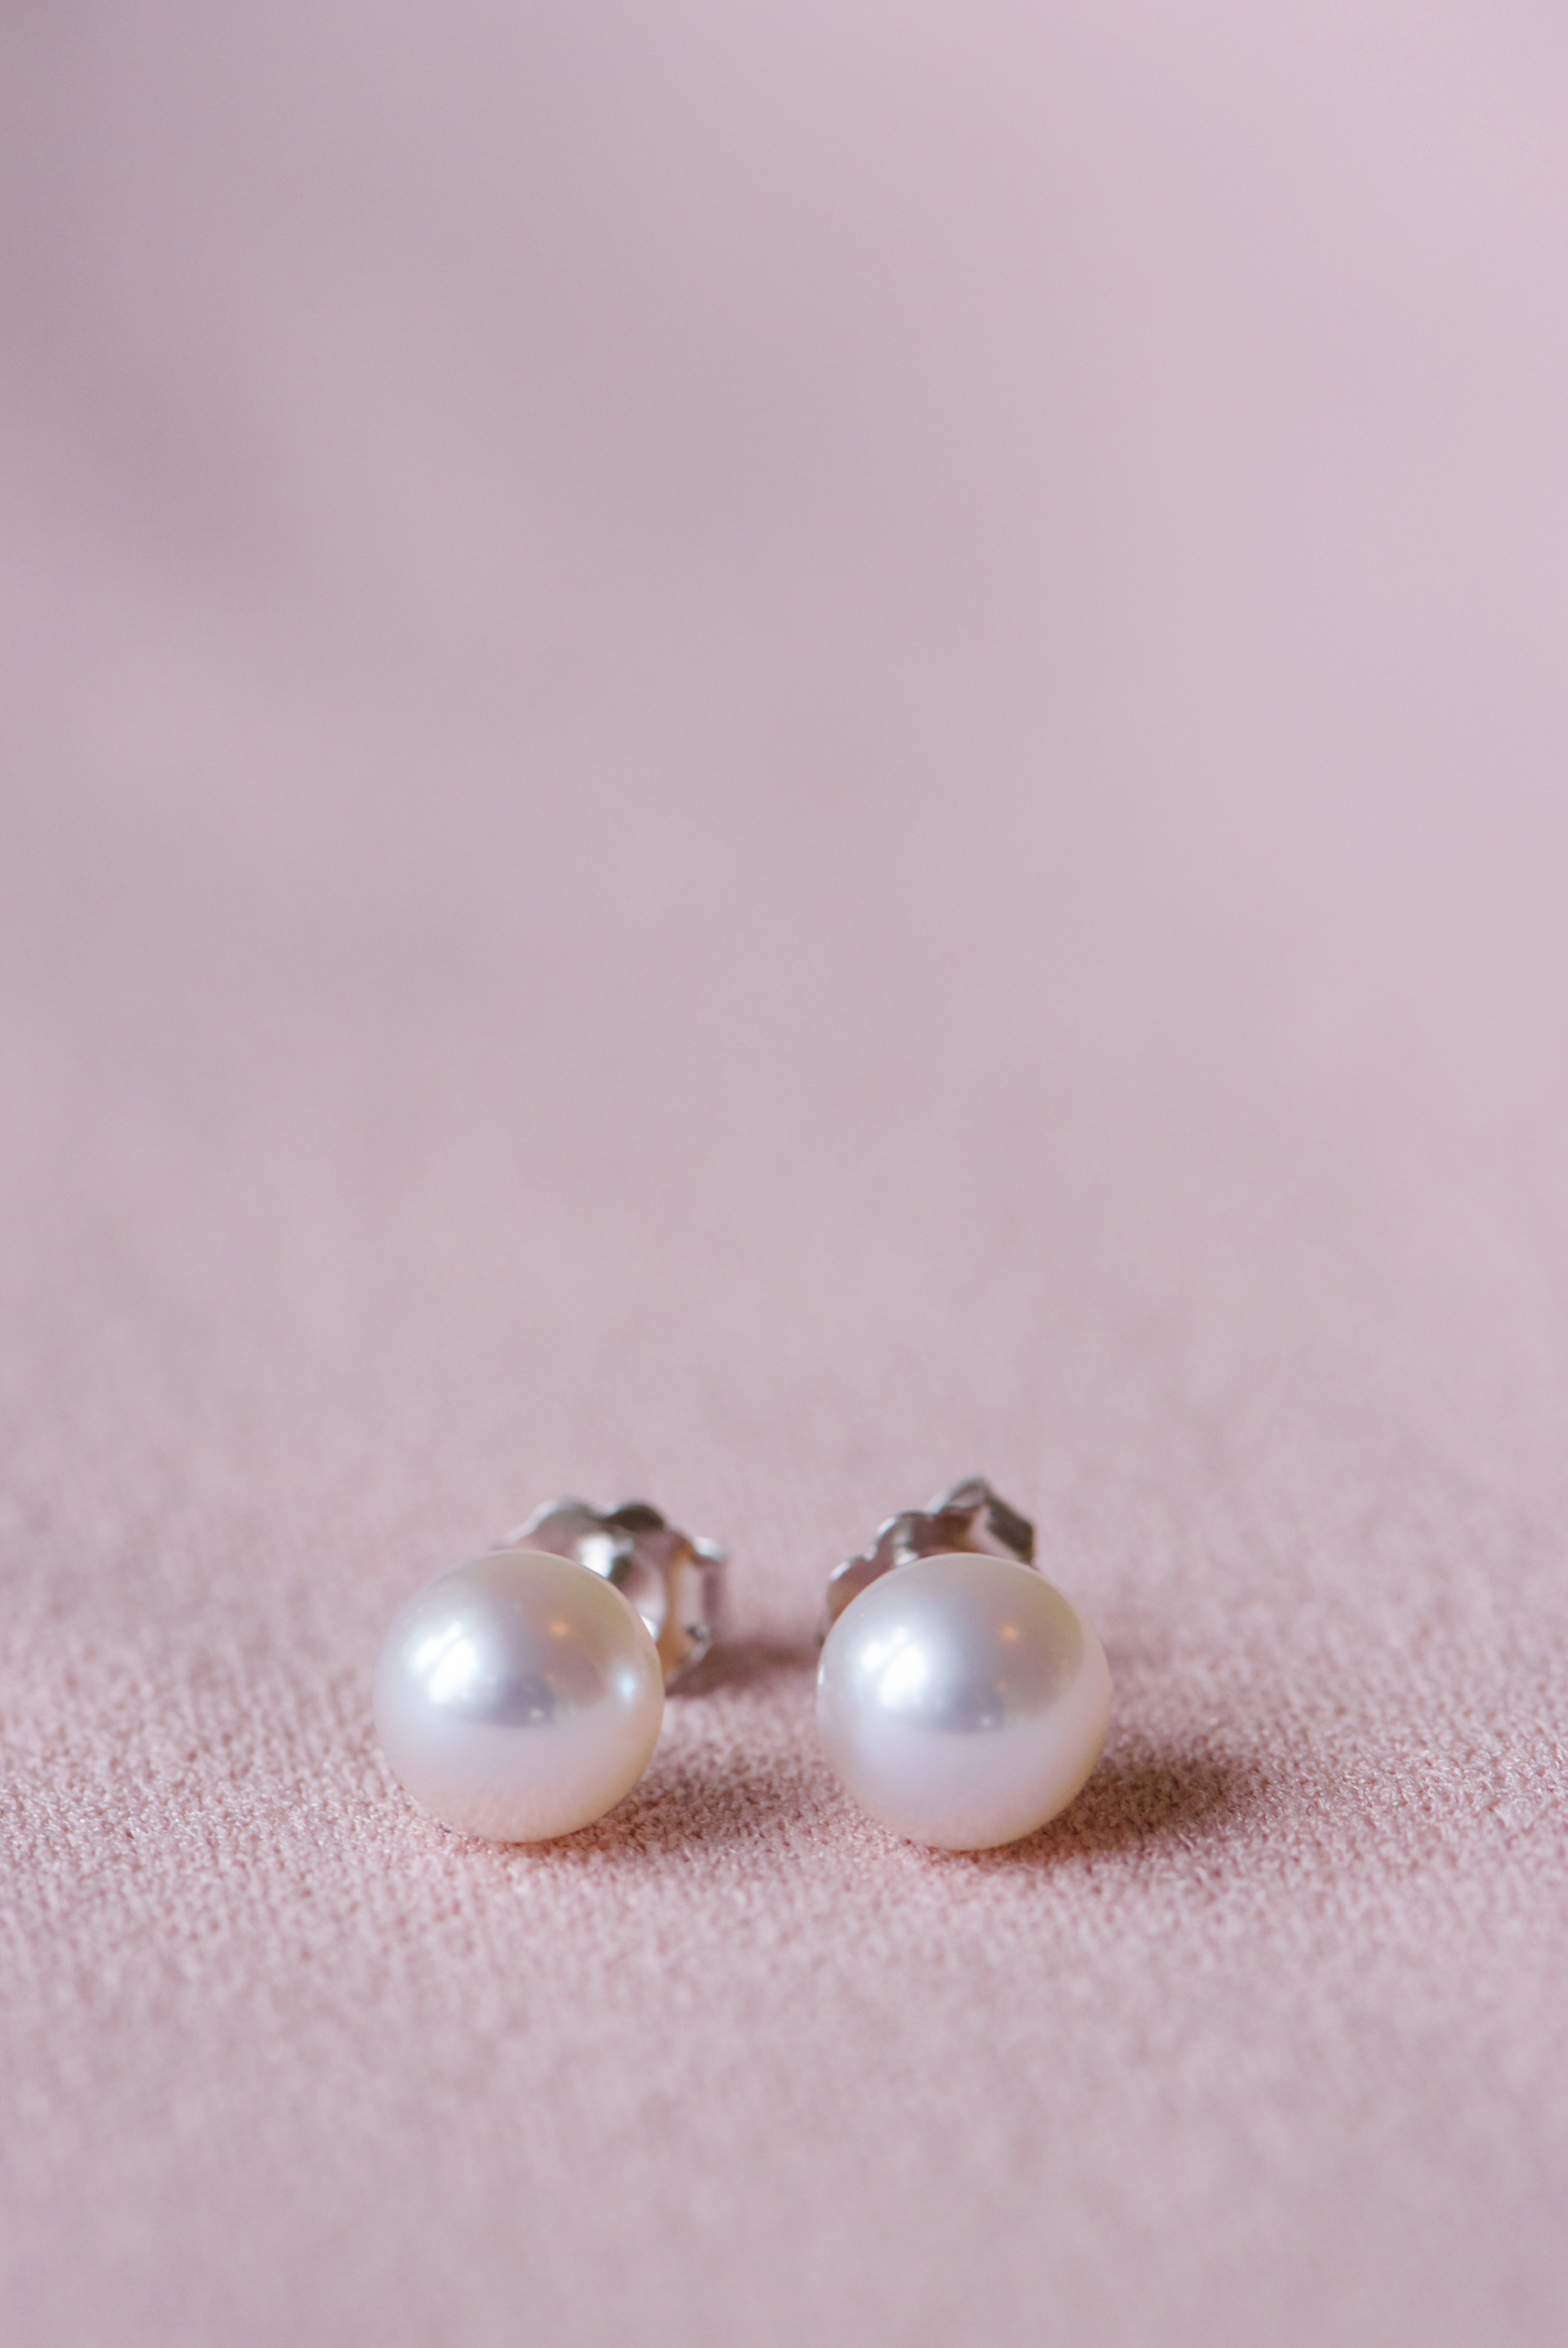 Pearl earrings against a blush background